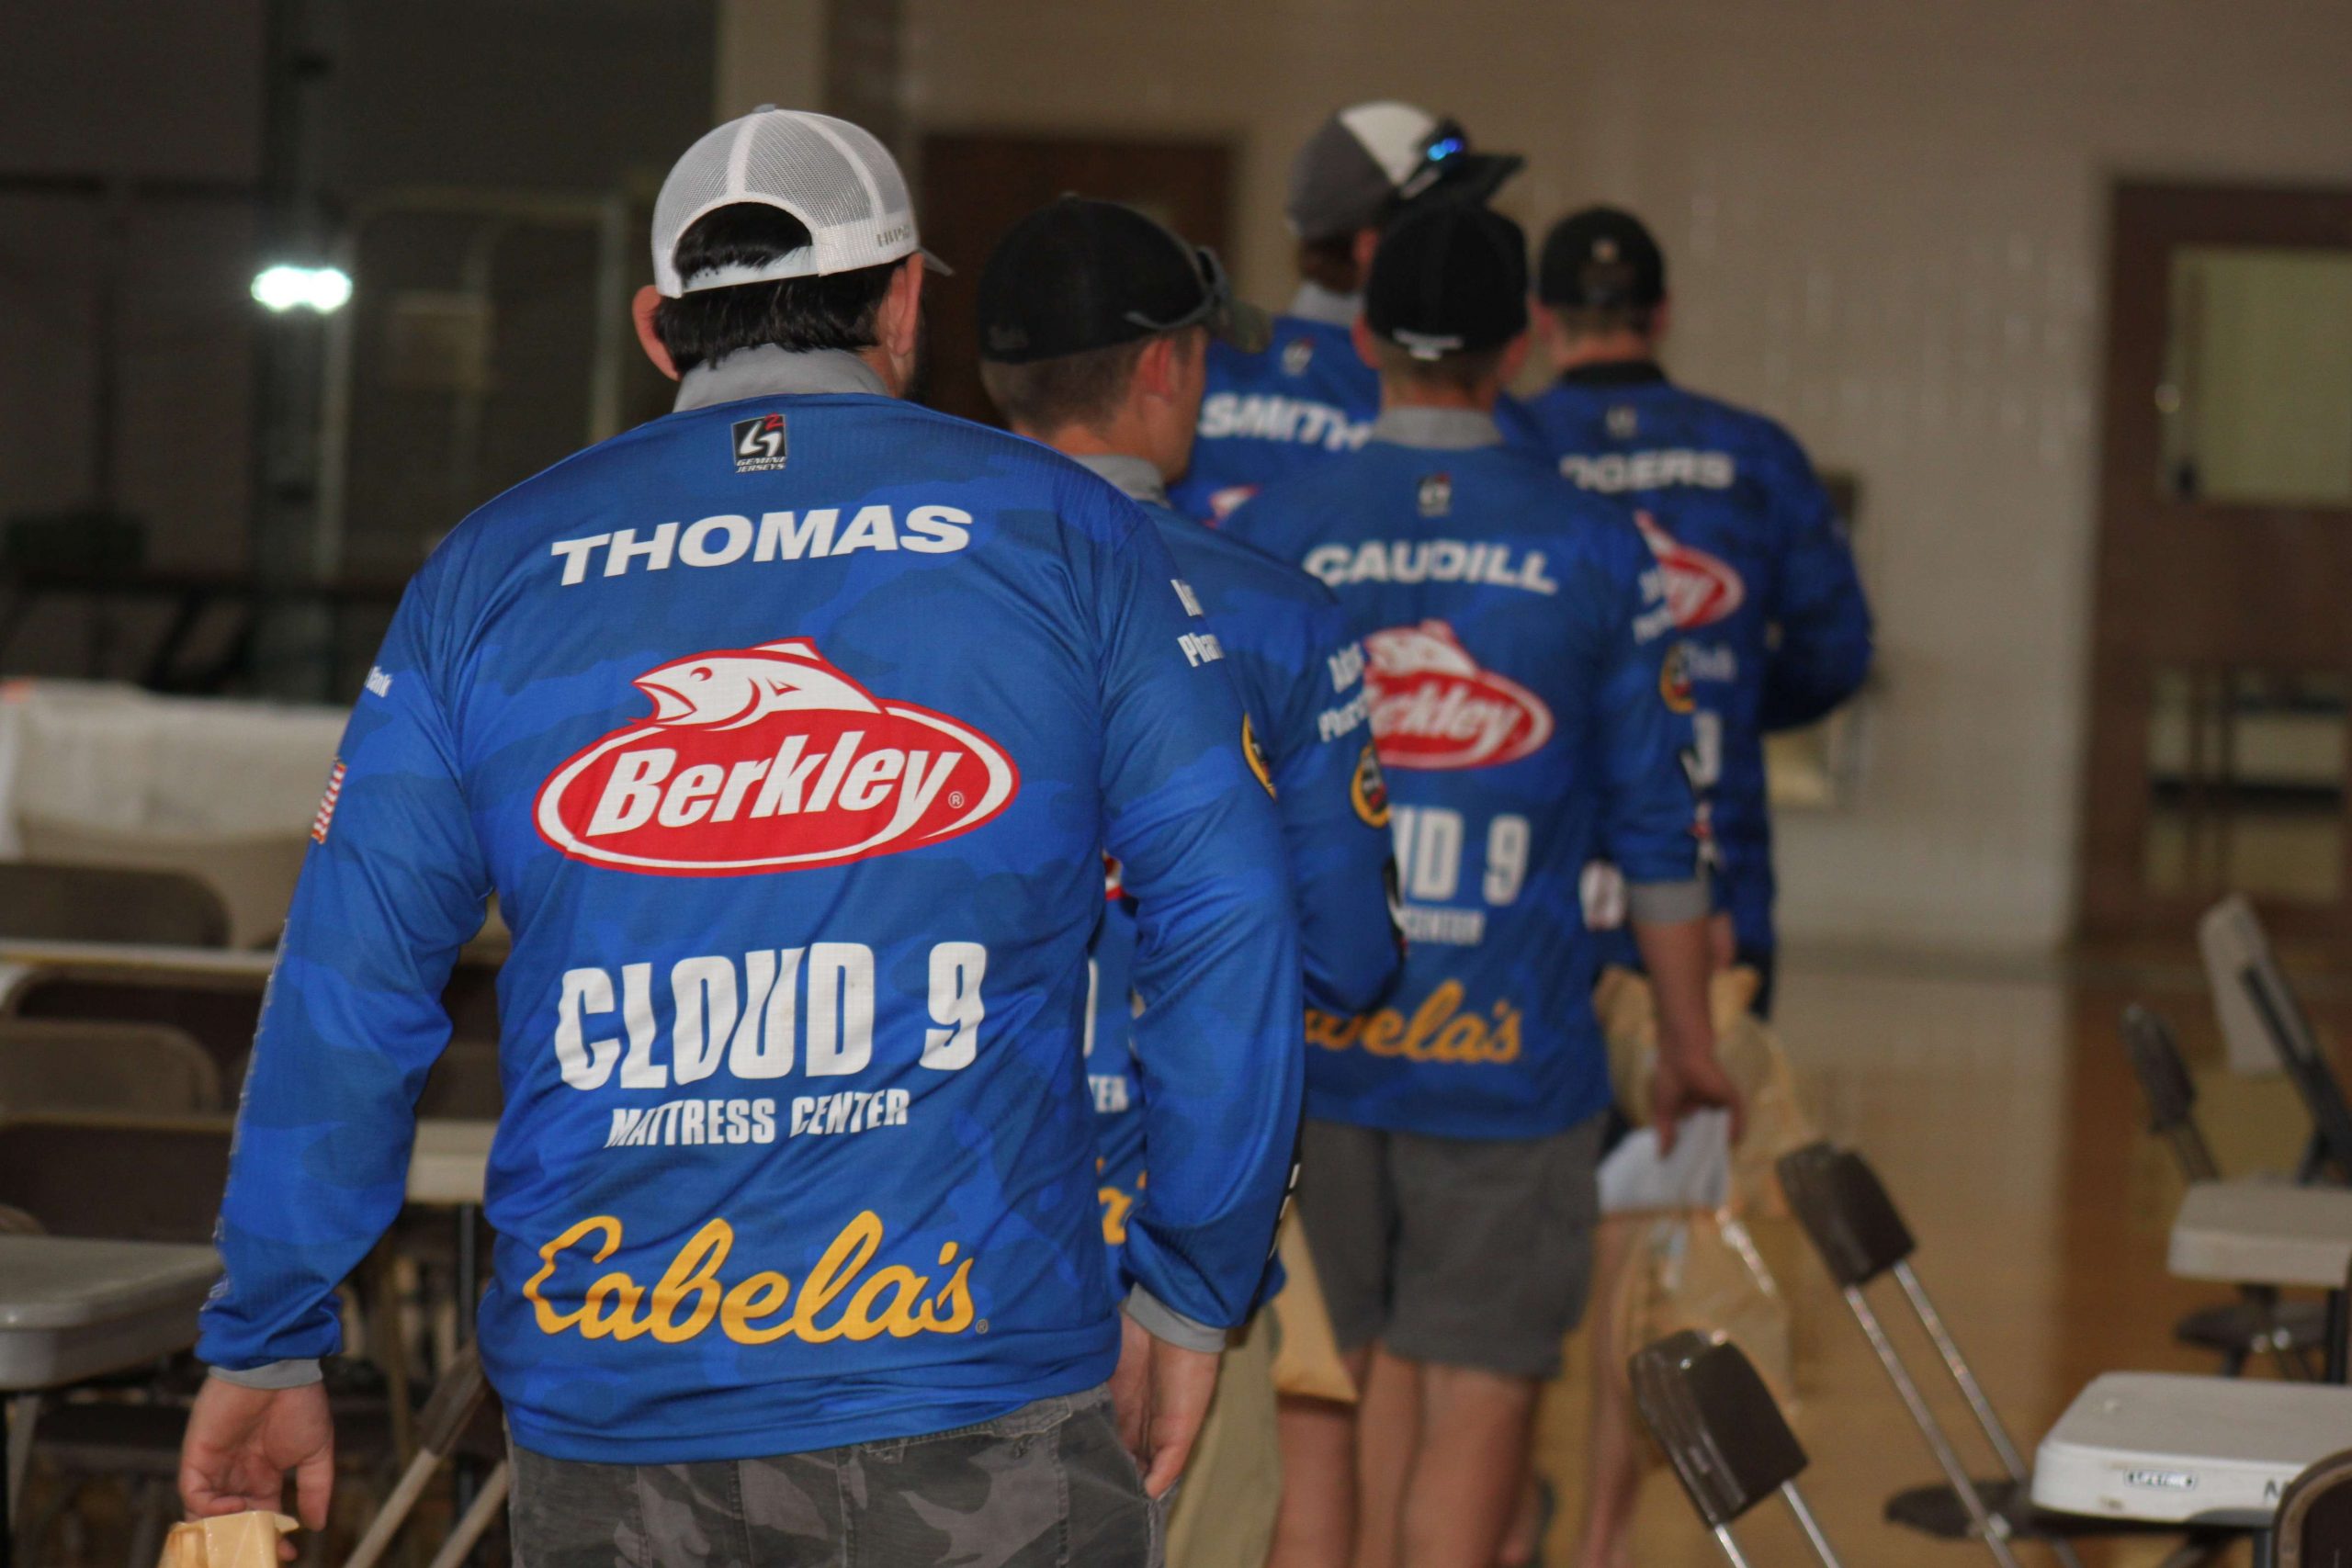 When the anglers are finished registering, some of them headed out for some R and R. They all had to return for 5 p.m., however, for the pre-tournament meeting.